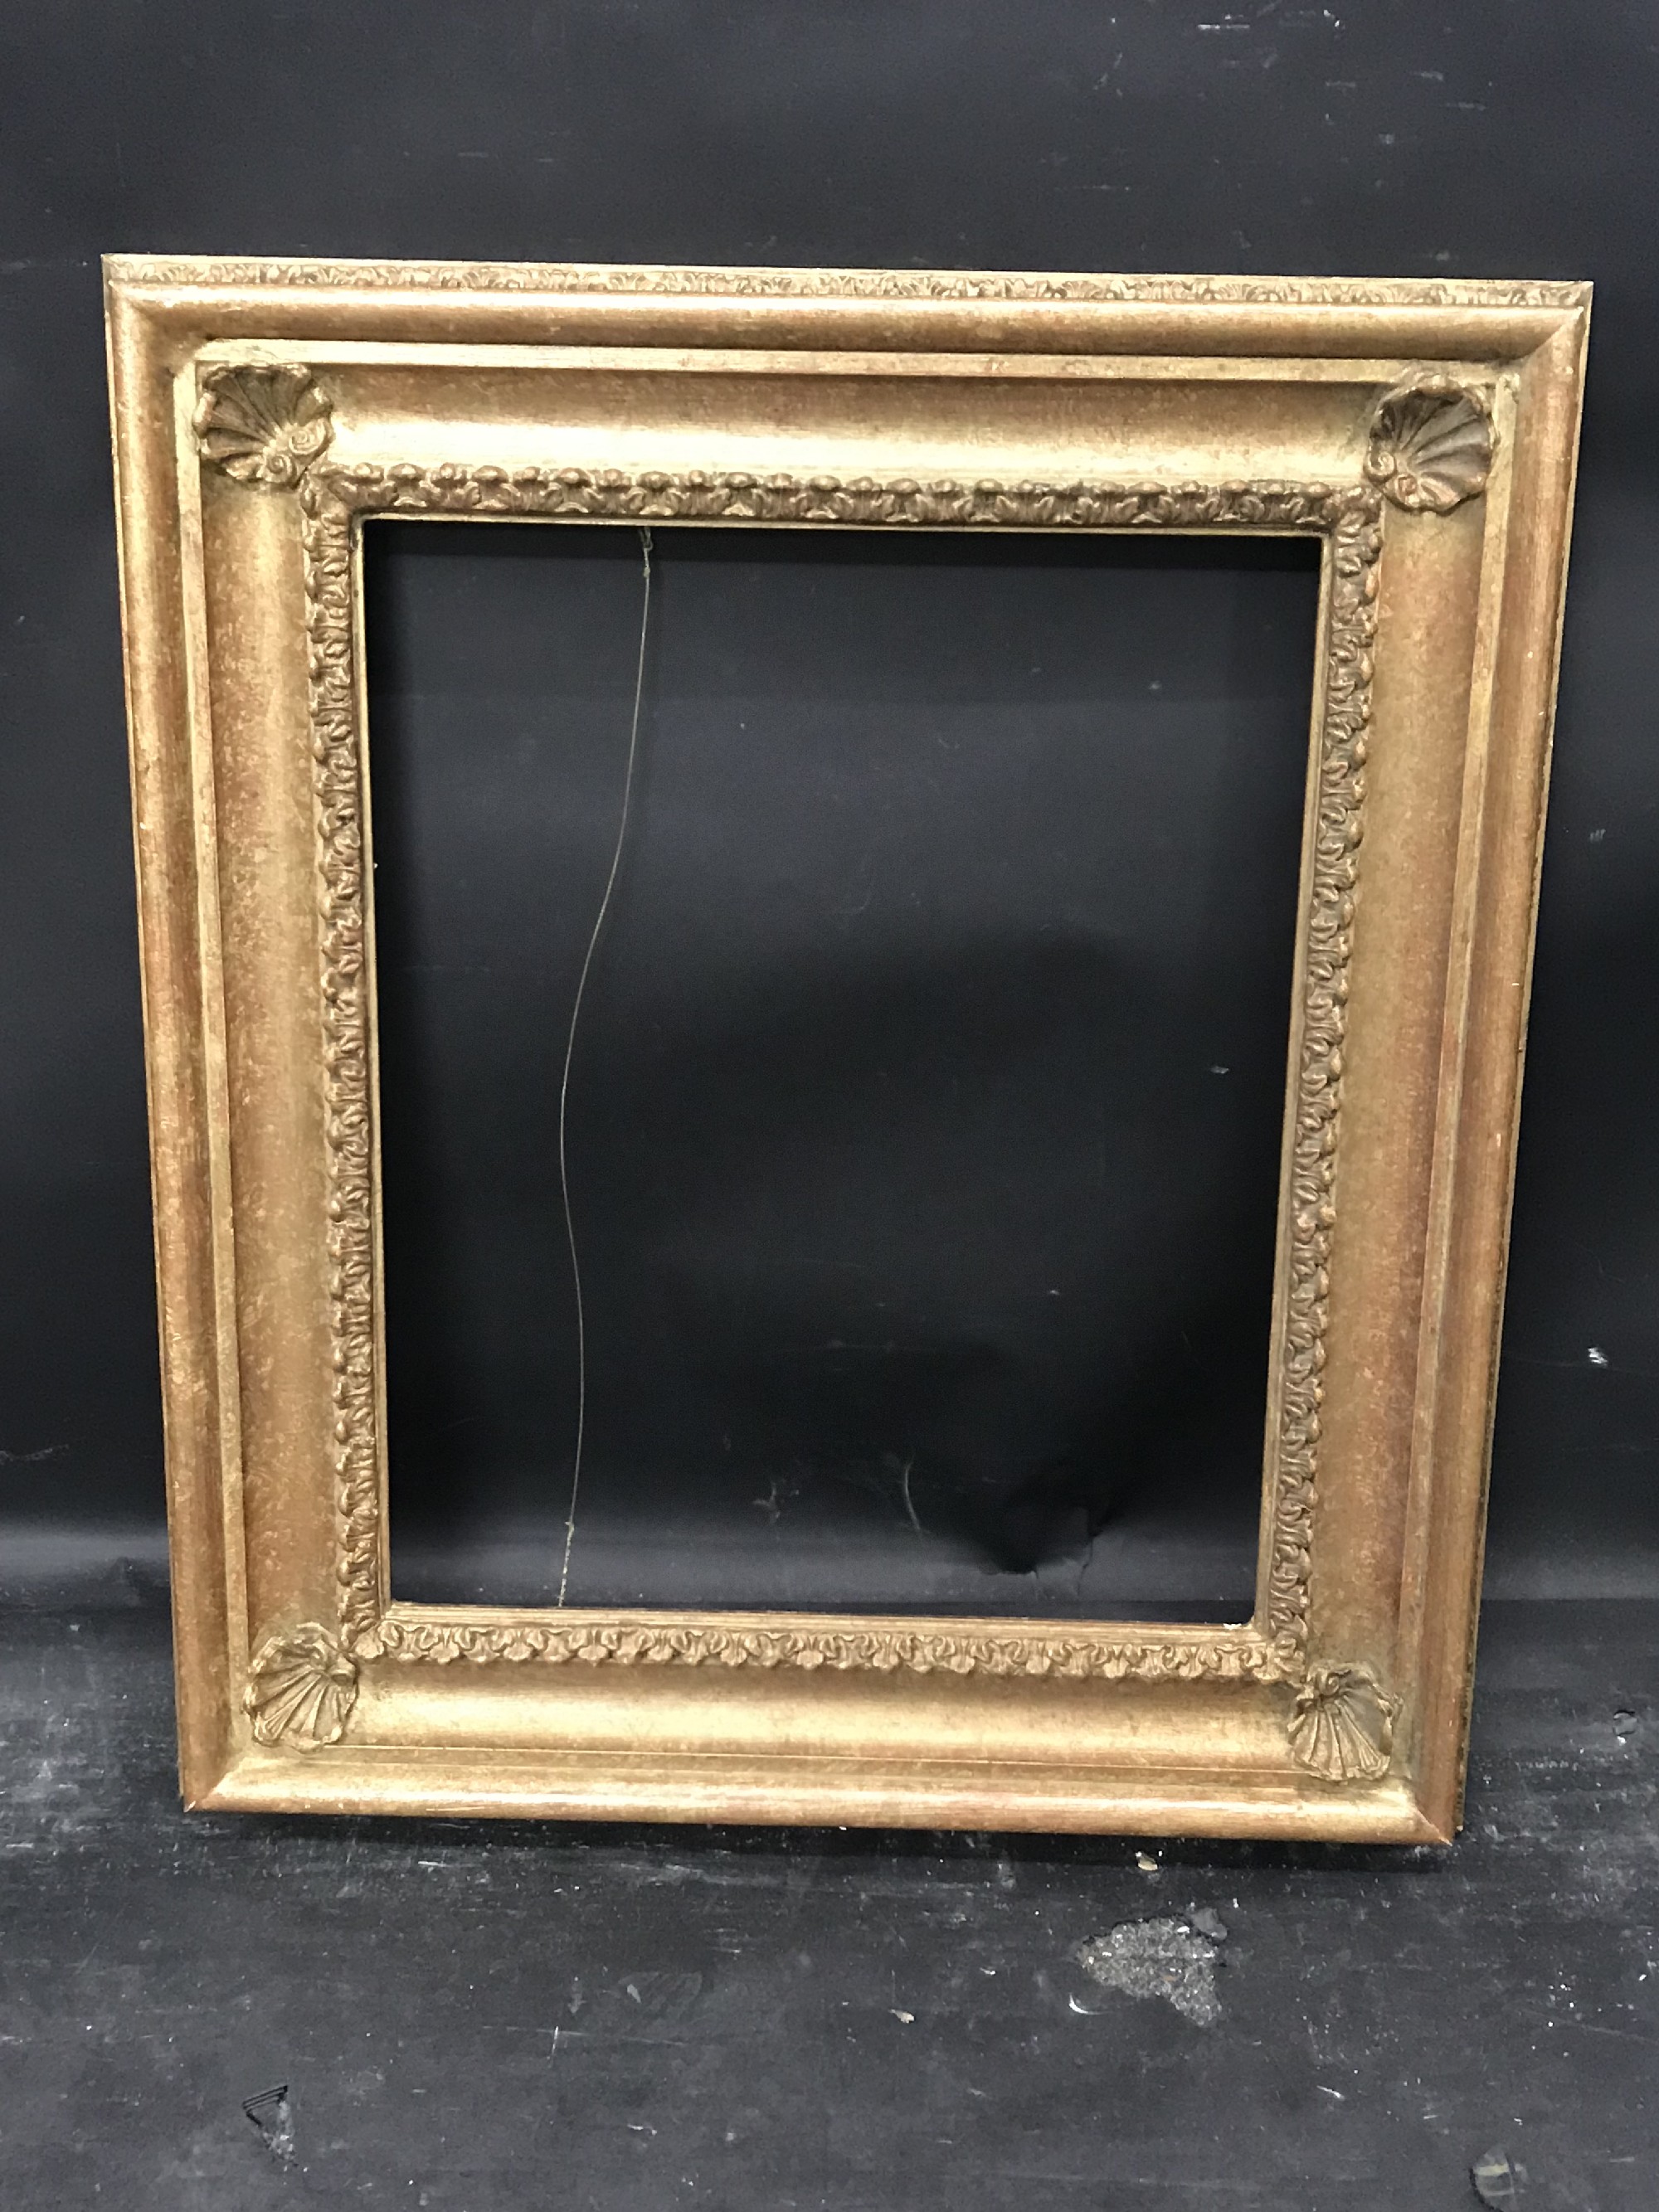 20th Century English School. A Gilt Composition Frame, 18" x 15". - Image 2 of 3